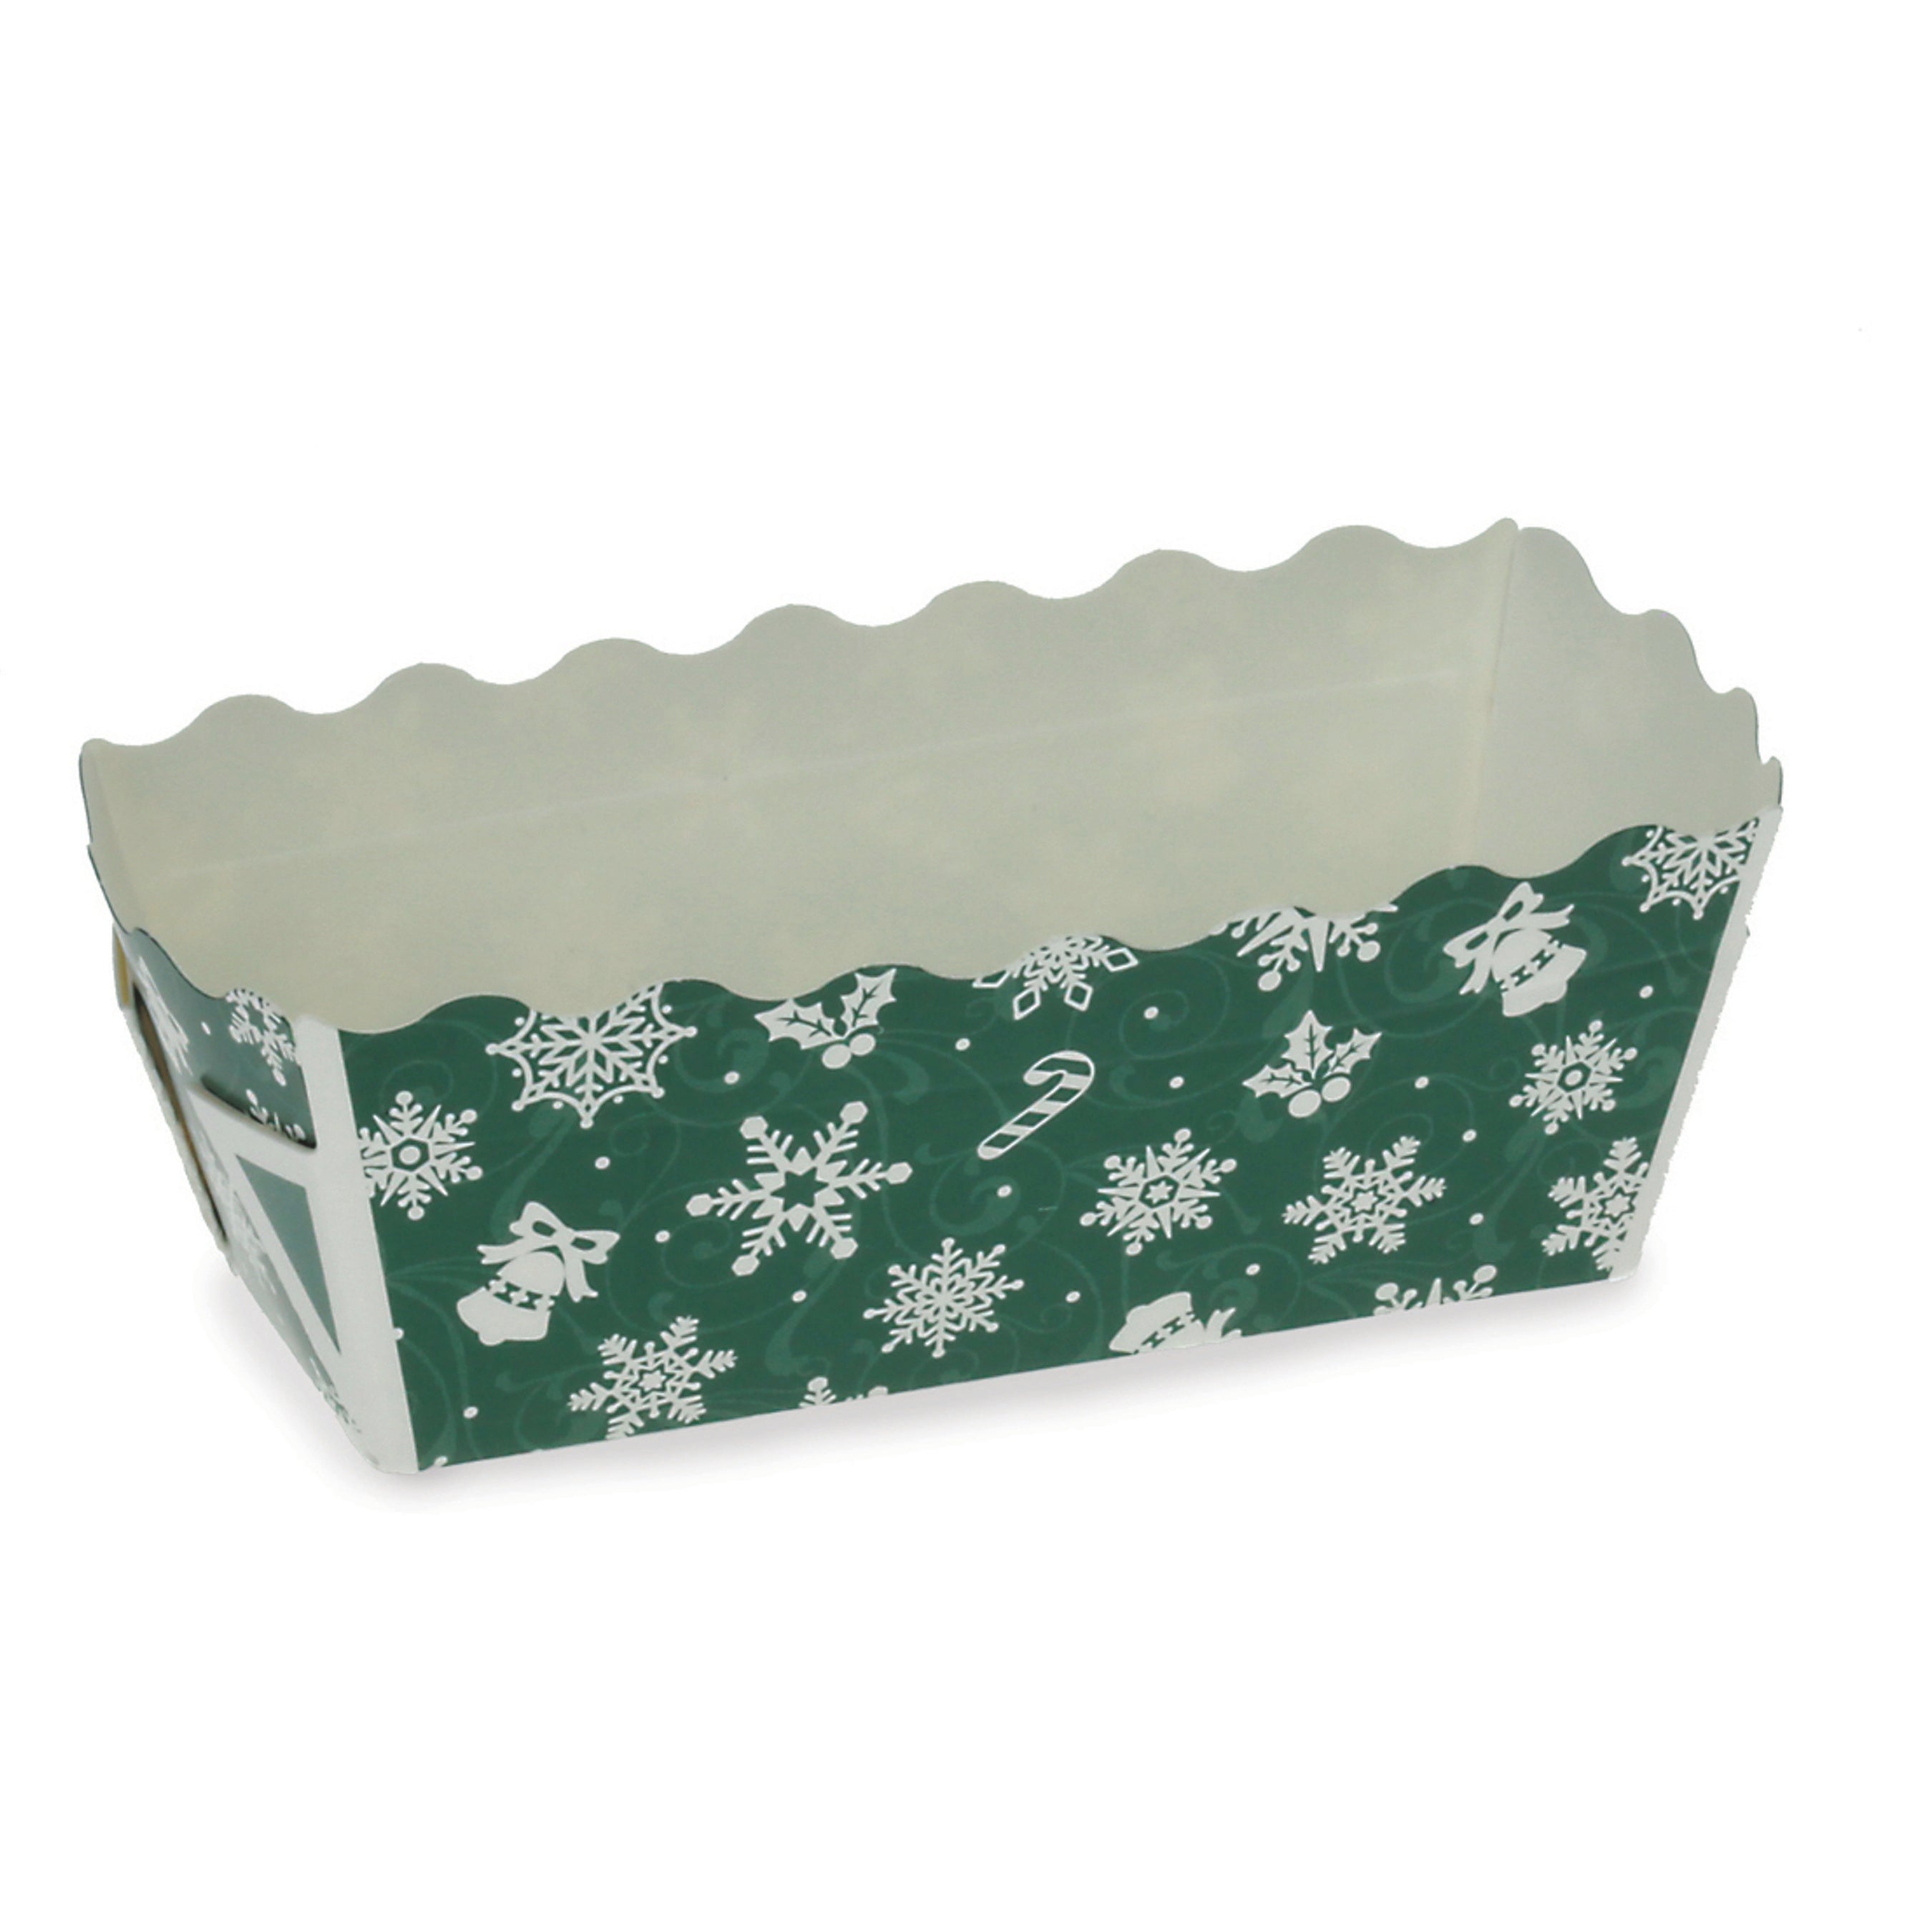 Assortment Sets, 3.2" Mini Loaf Set, Green Snowflake - Welcome Home Brands